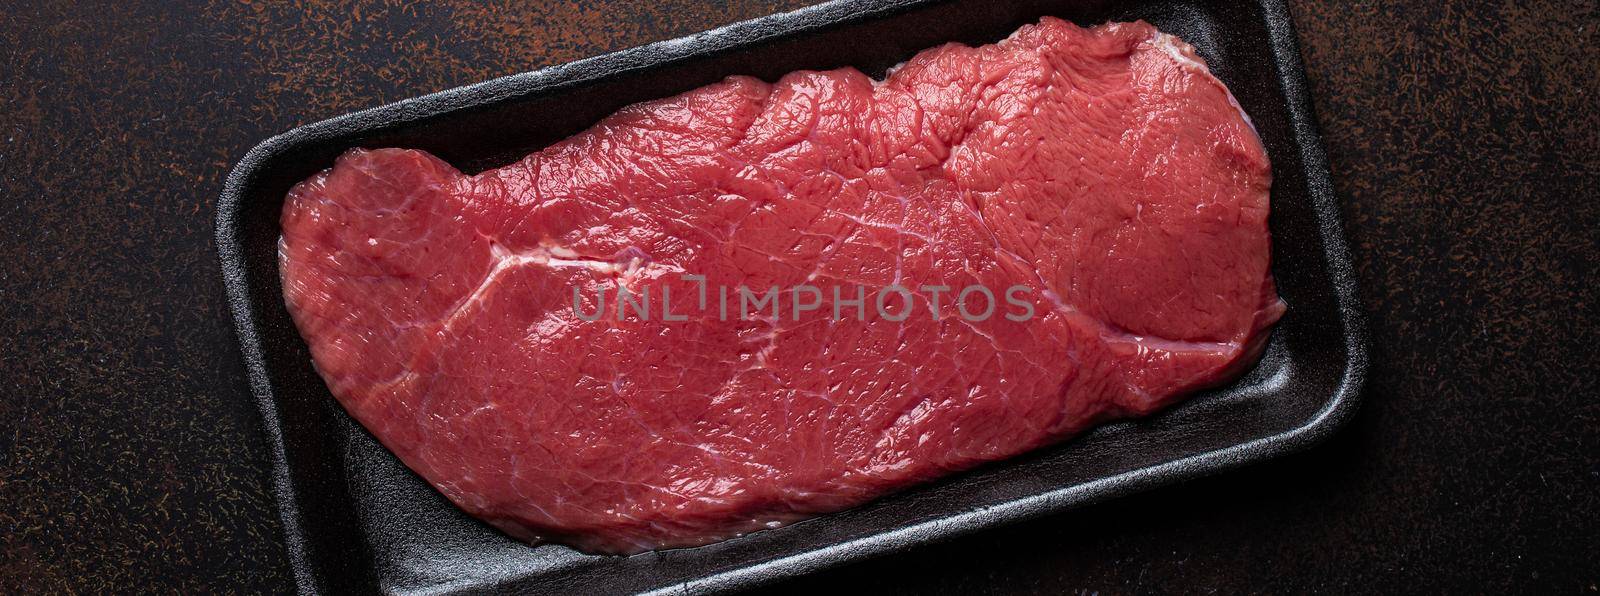 Beef lean raw fillet steak in black plastic container by its_al_dente